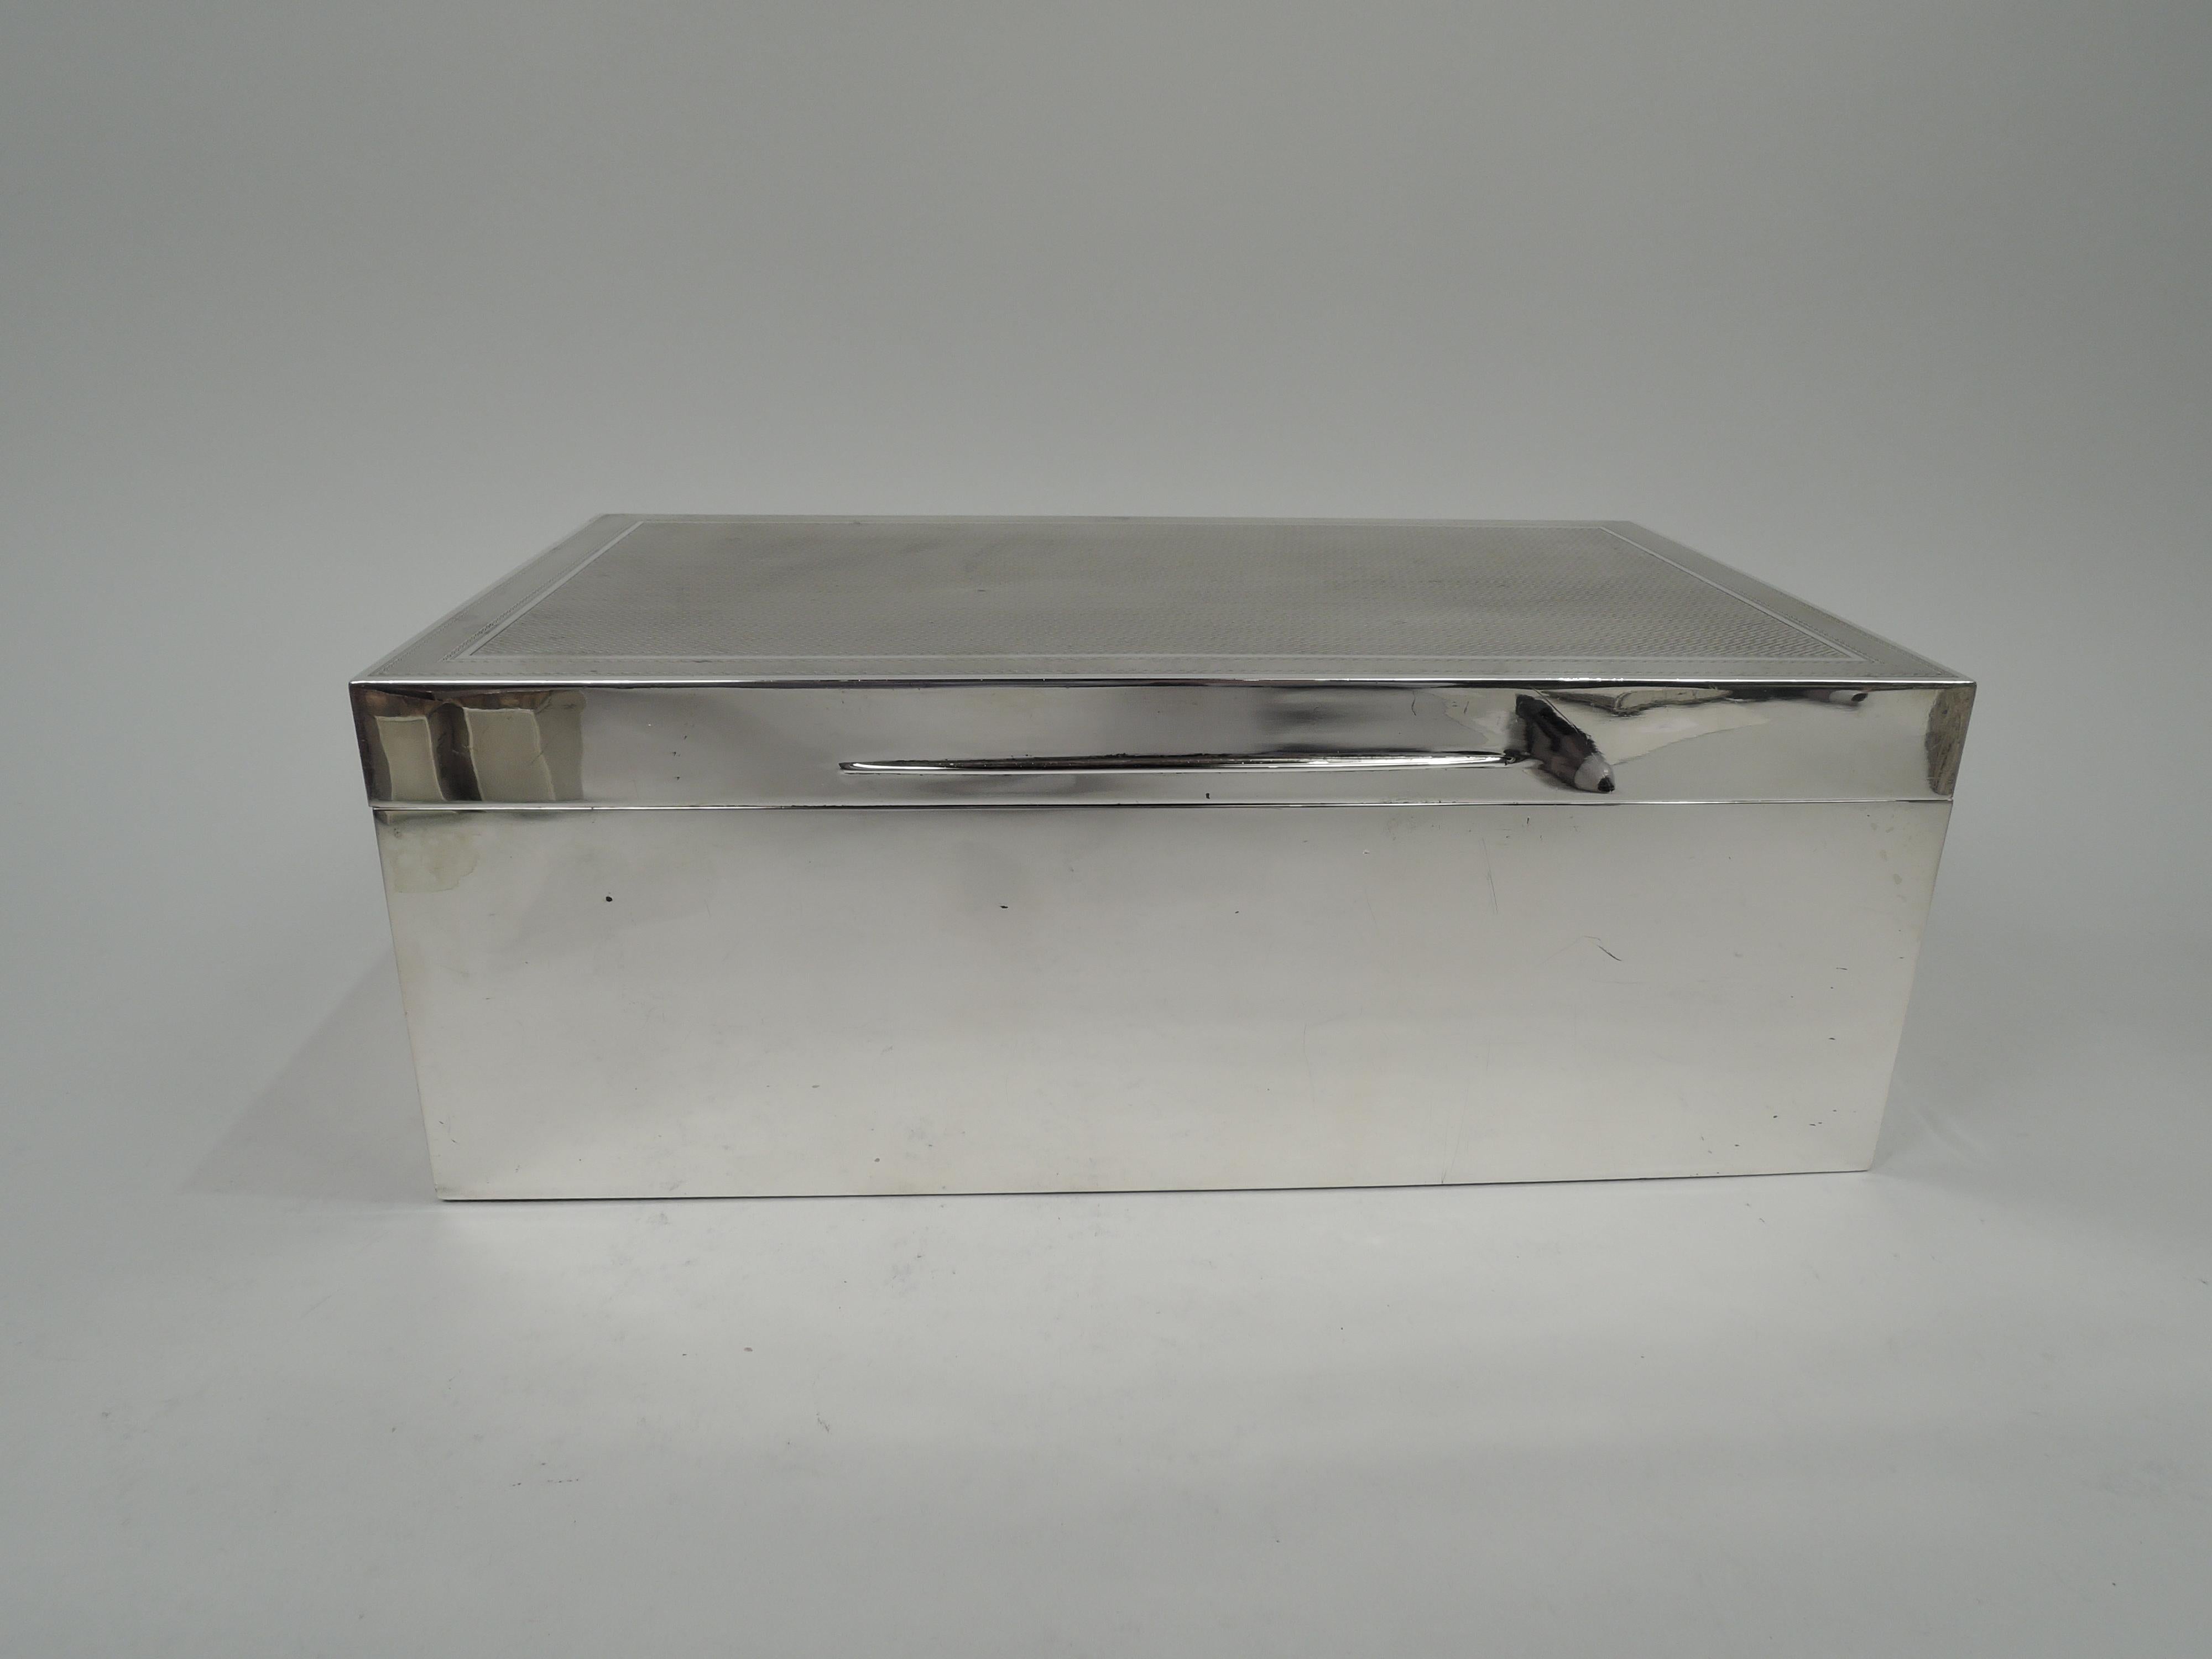 George V sterling silver cigar box. Made by Barnard & Sons, Ltd in London in 1930. Rectangular with straight sides. Cover hinged and with tapering tab; top flap with engine-turned linear pattern bordered by wraparound lines between wavy lines.